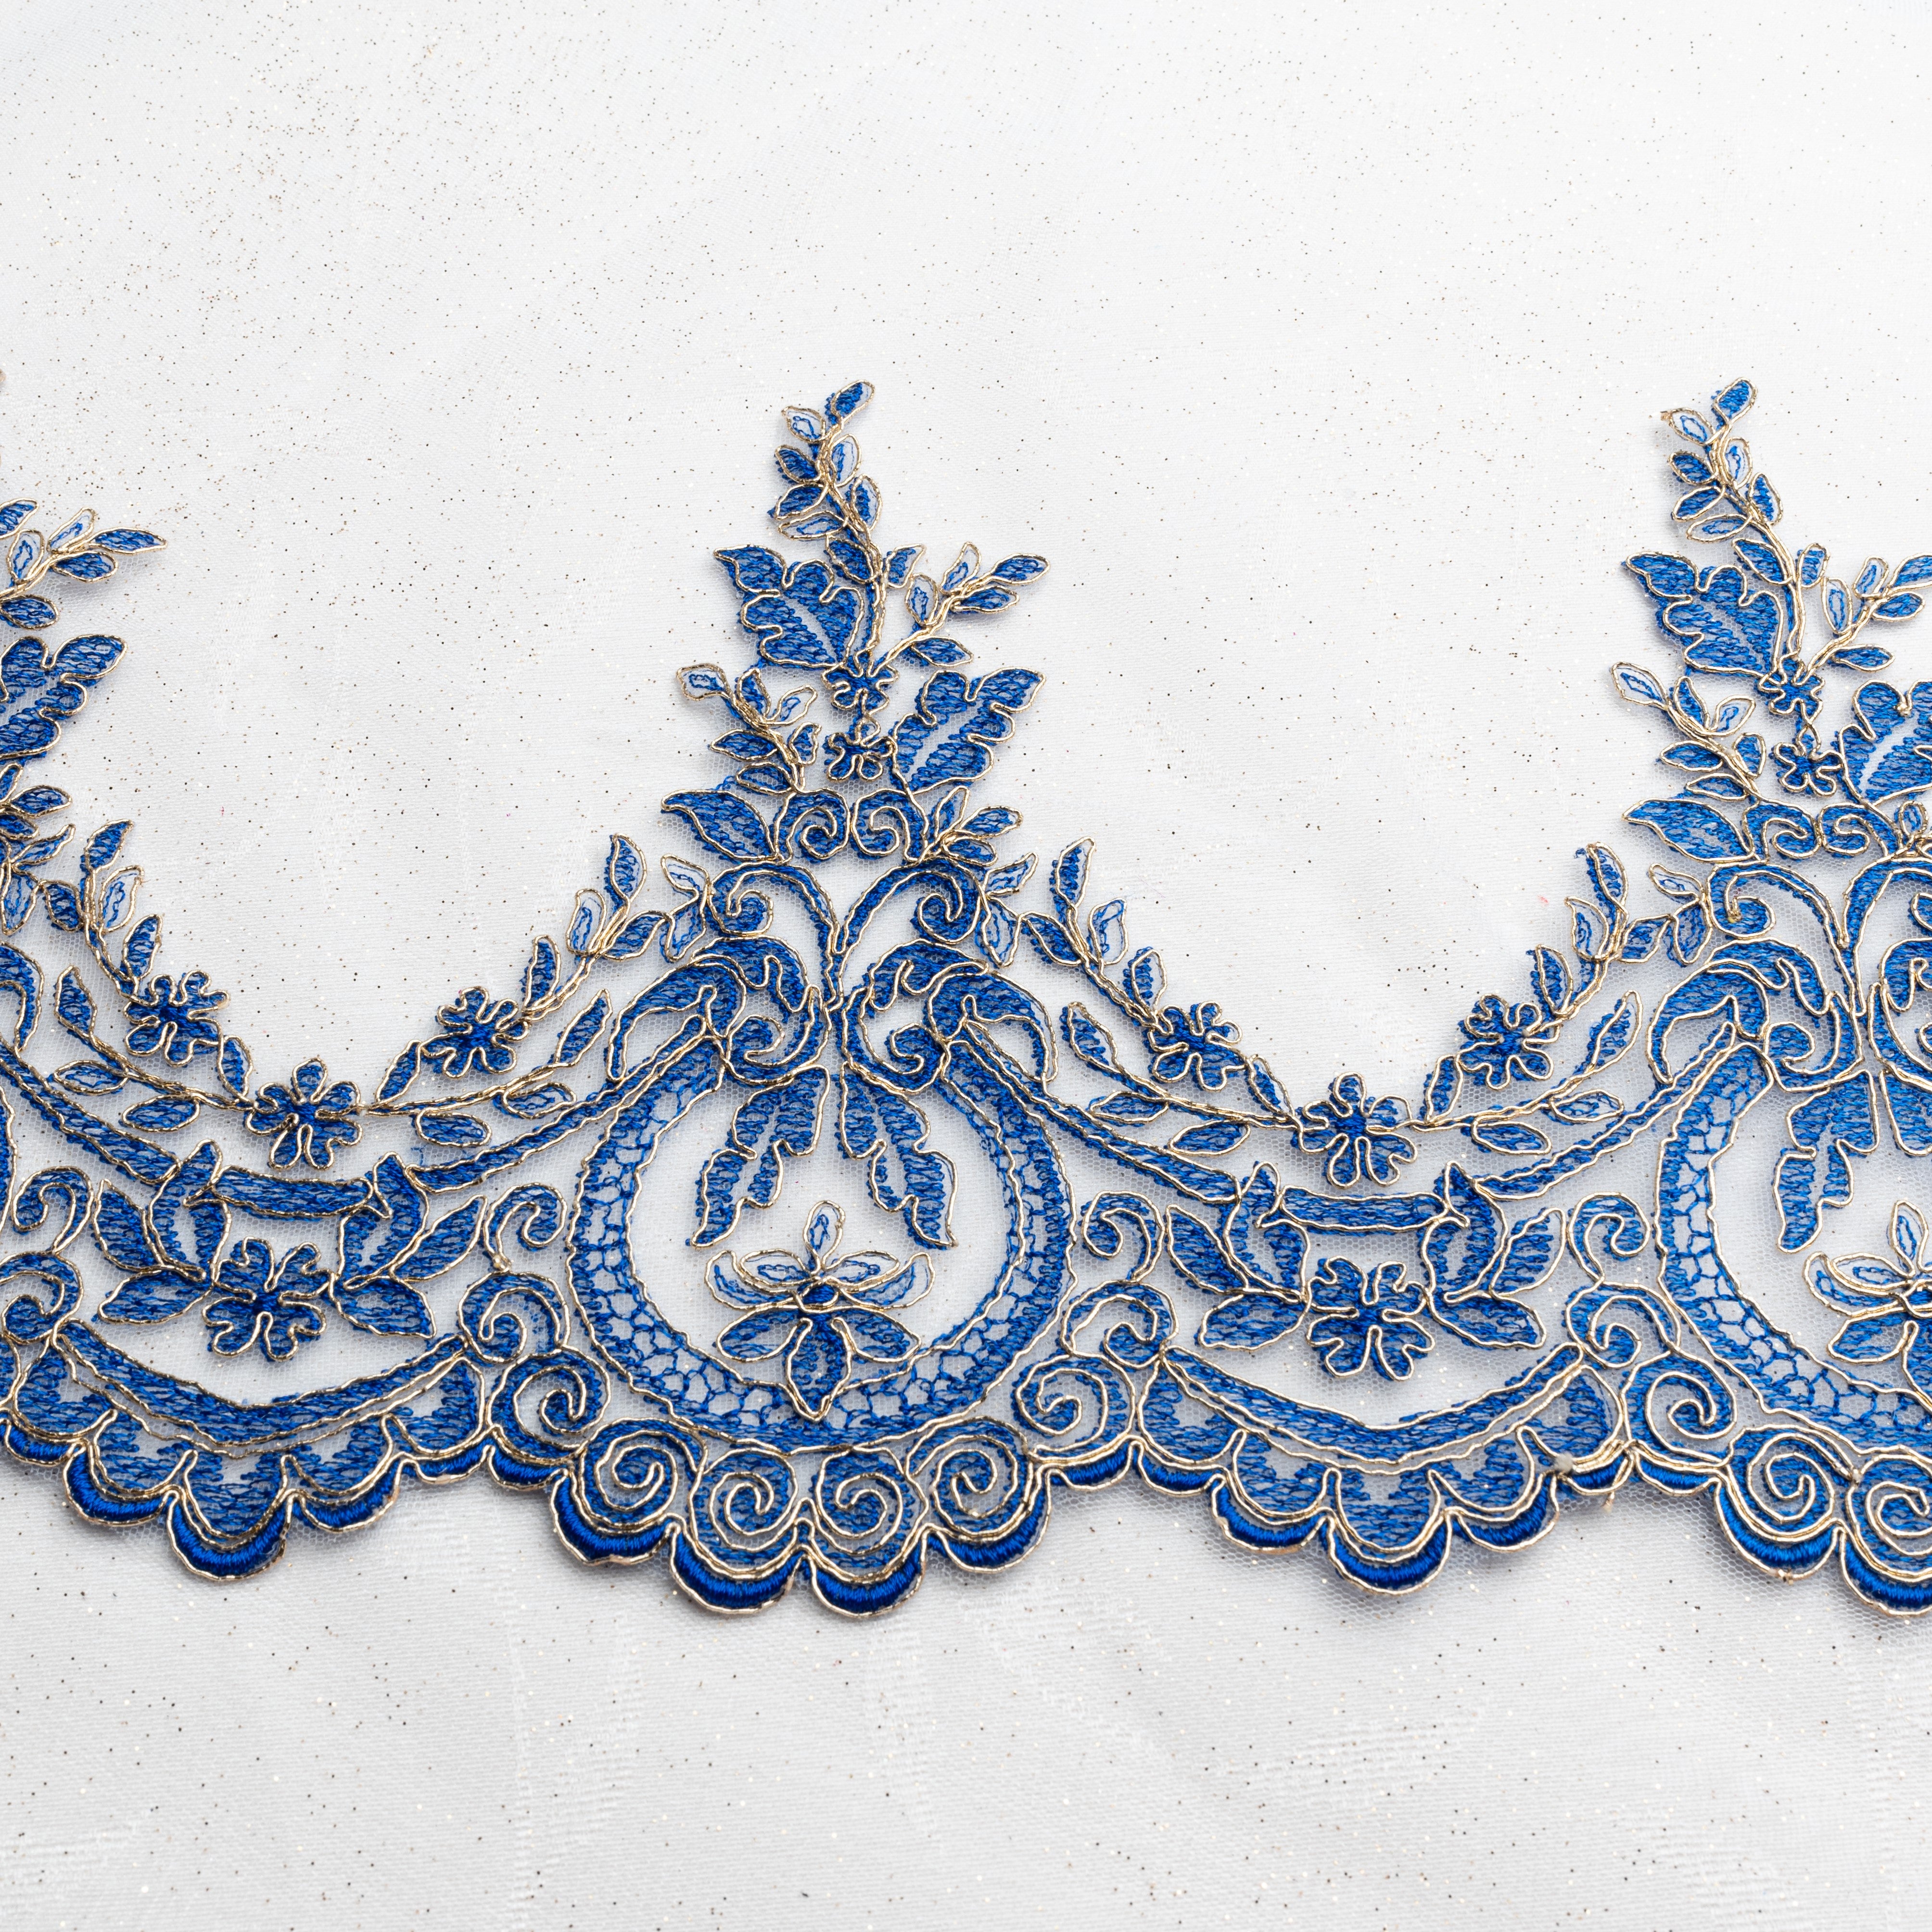 Royal blue and gold border lace embroidered with royal blue thread on a fine net backing with gold cord outlining the floral design. A very regal lace. The size is 23 cm high with a 17 cm pattern repeat.